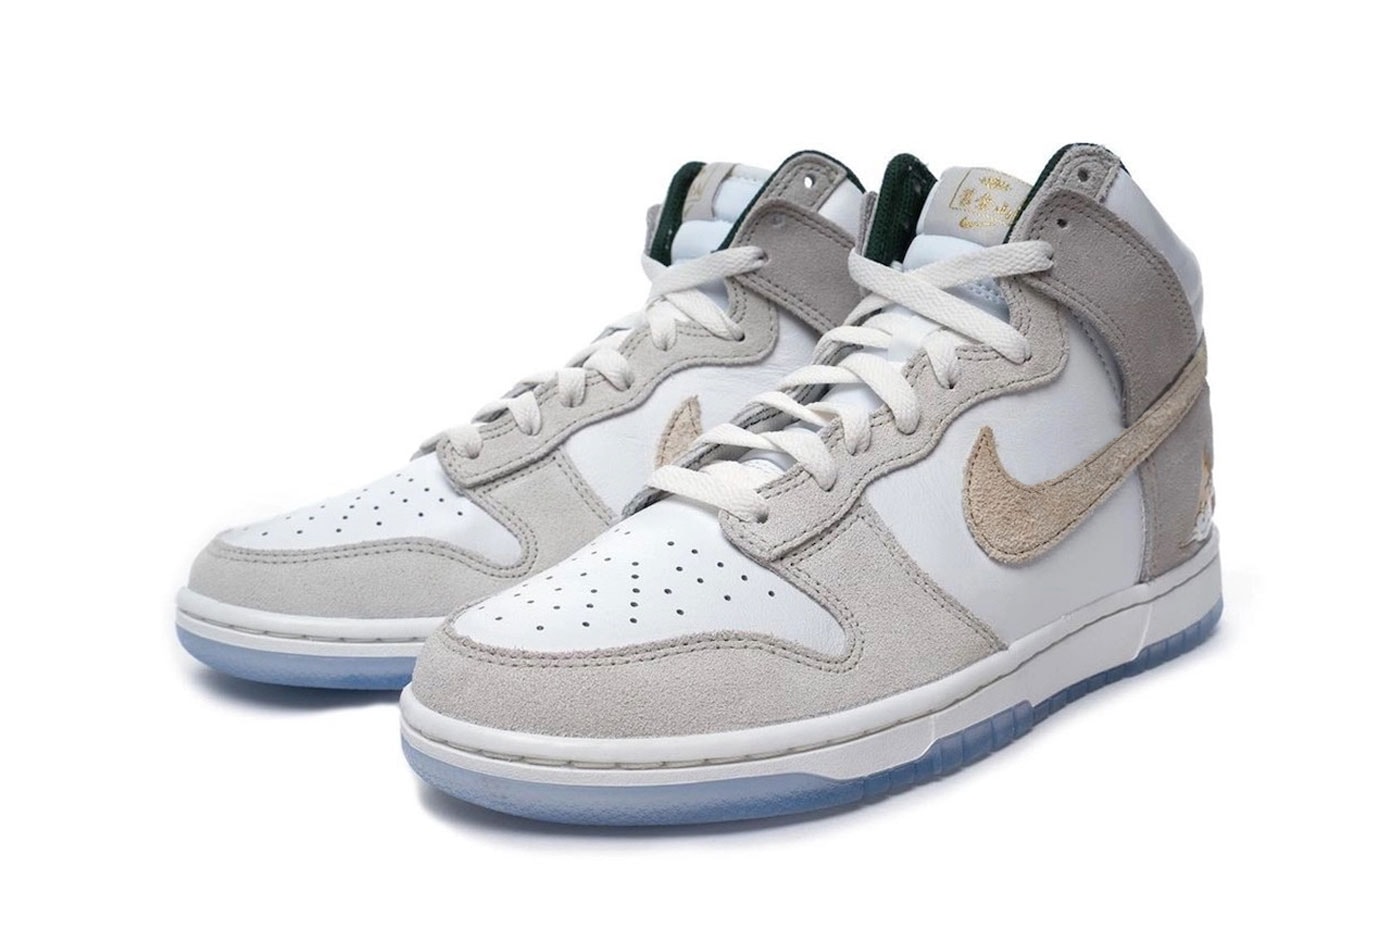 Nike Dunk High Lunar New Year Summit White Desert Ore LIght Bone Evergreen Sail Yellow Gold January 1 FD0776 100 135 usd fengshui mountain cloud chinese characer gold mountain release info date price